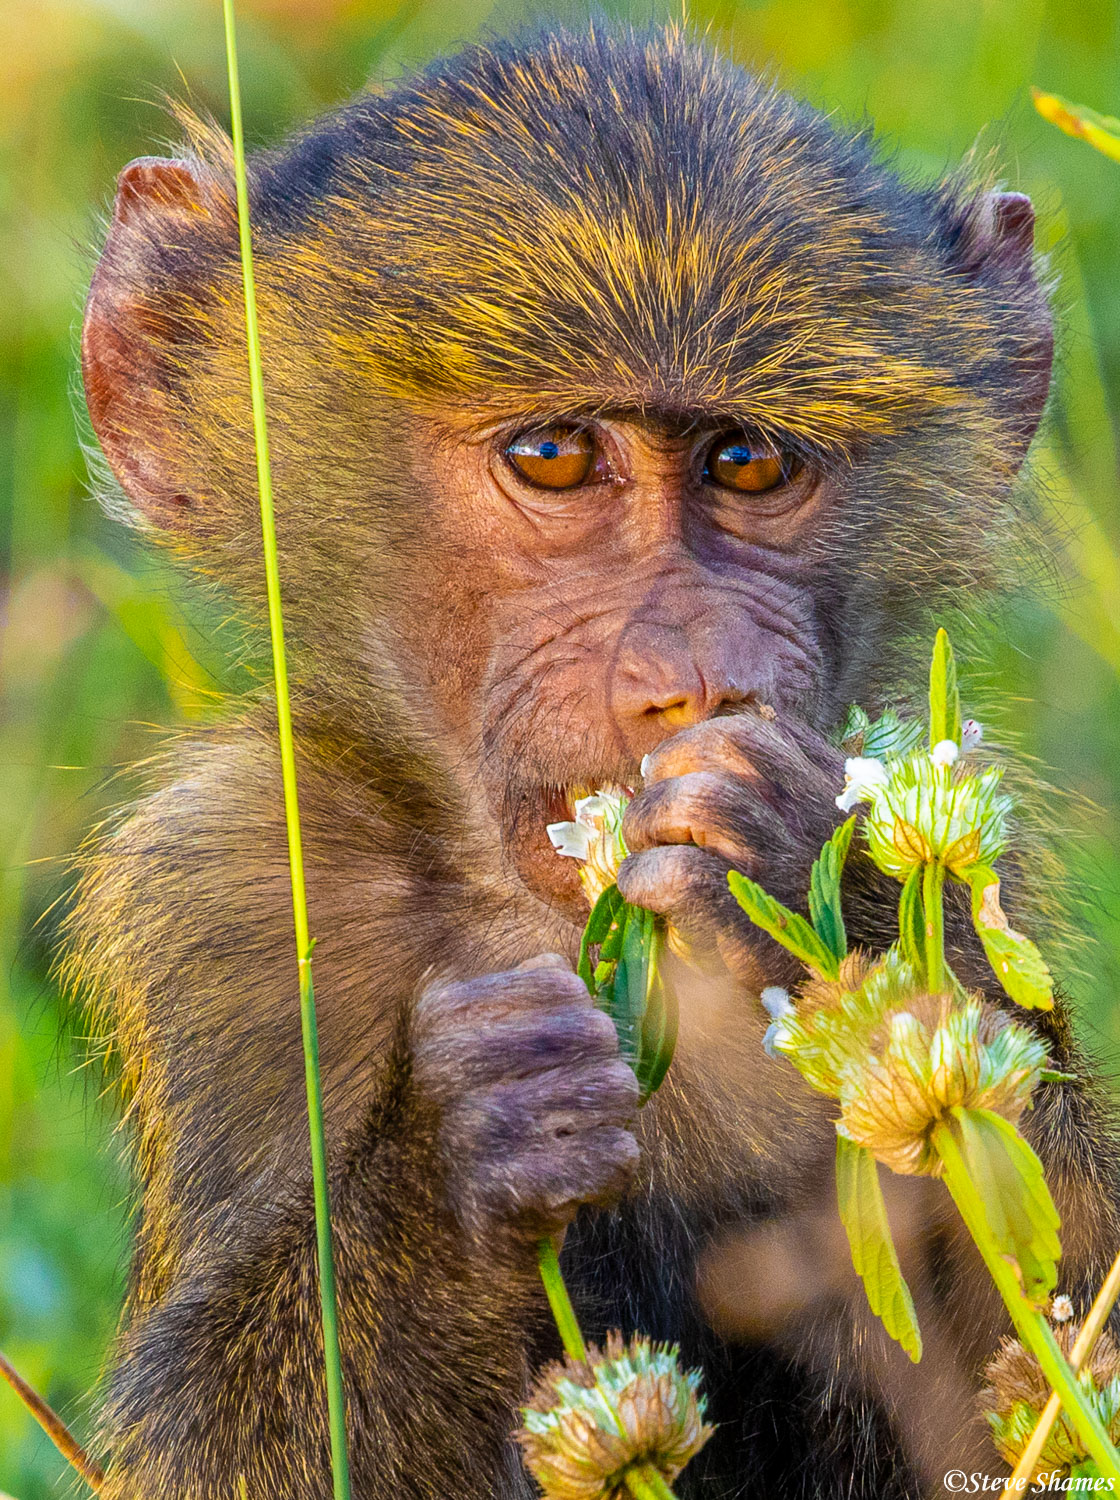 Here is a nice portrait of a cute little baby baboon.